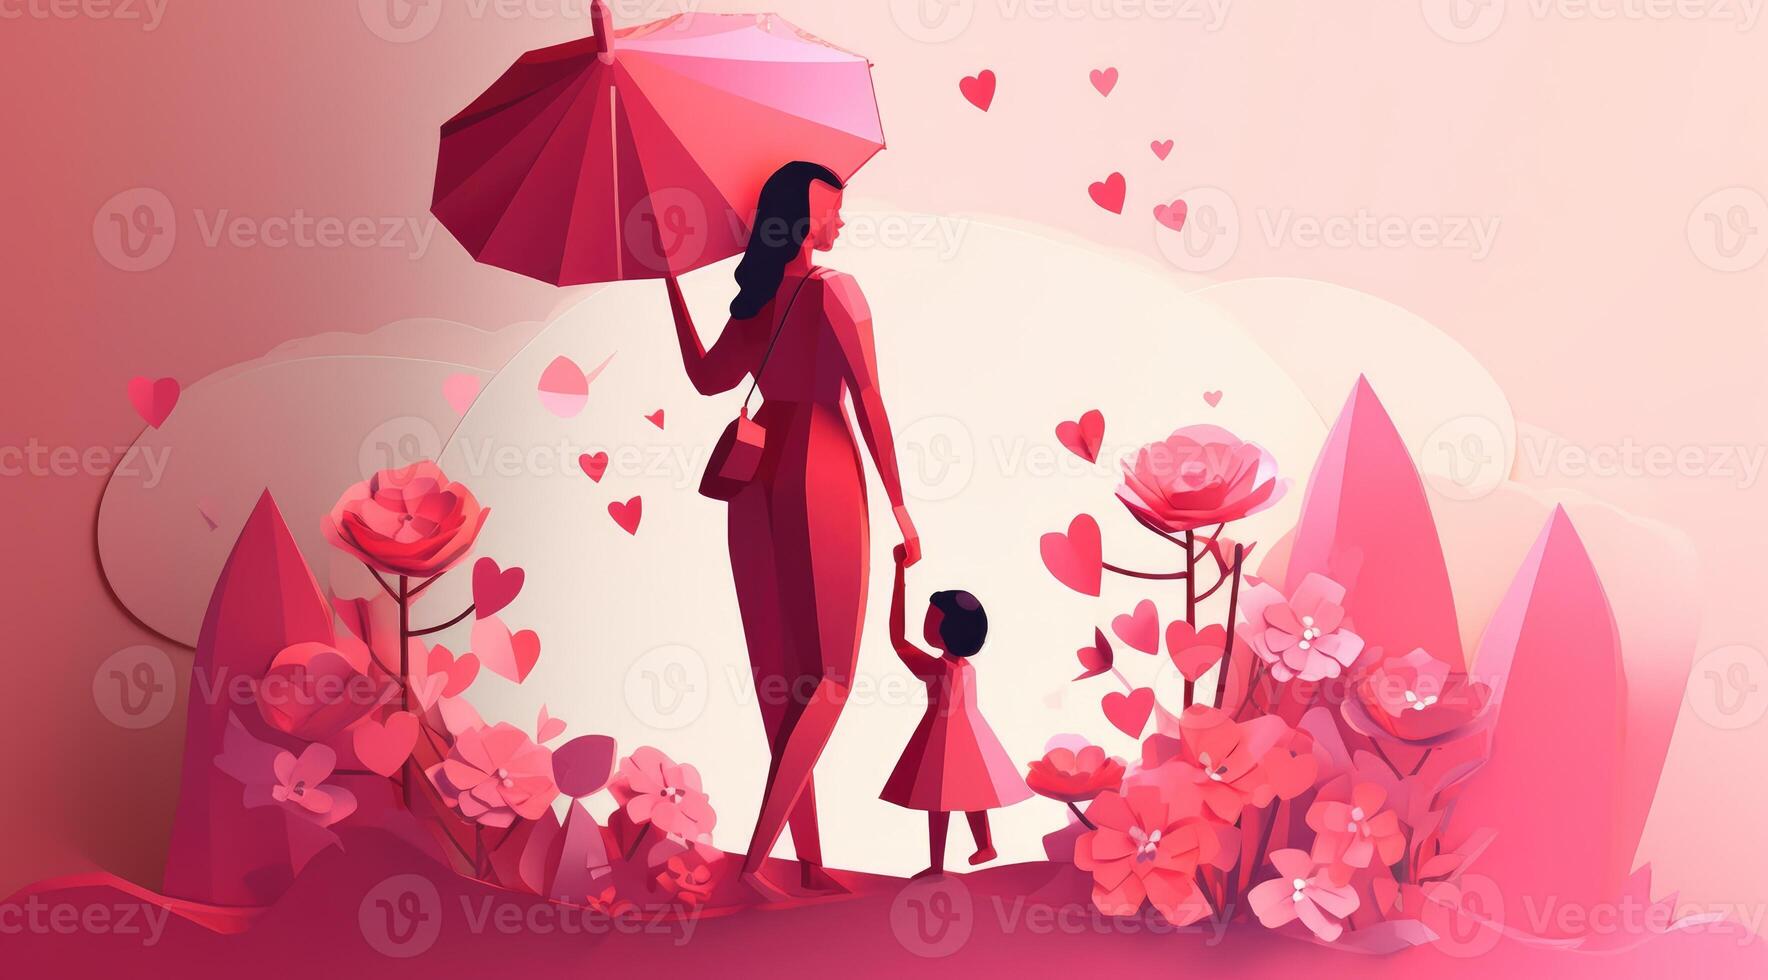 Mother's day greeting card clipart personalized mother card template, in the style of 3D polygonal paper art with photo